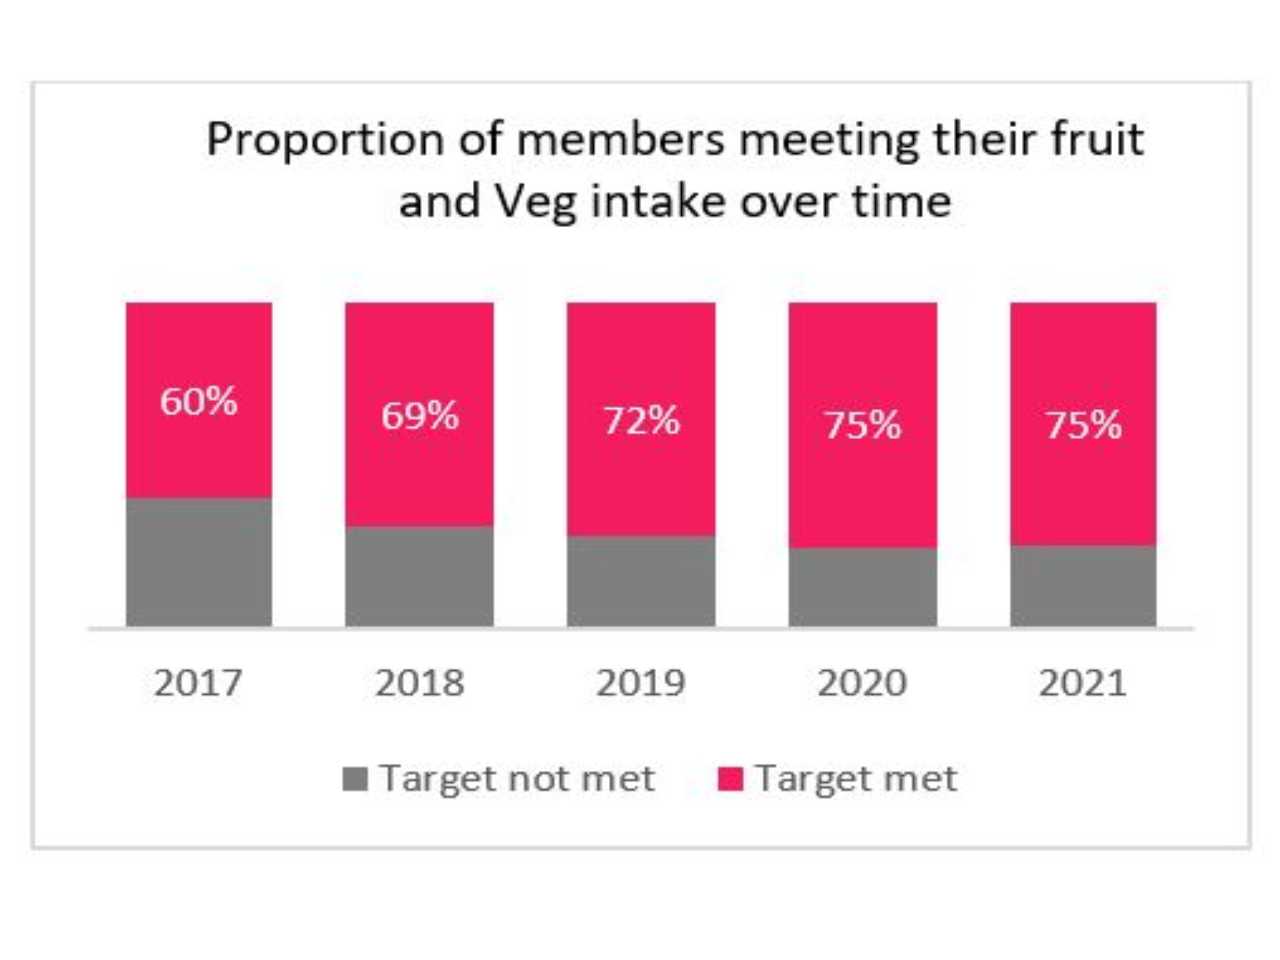 Proportion of members meeting their fruit and veg intake over time